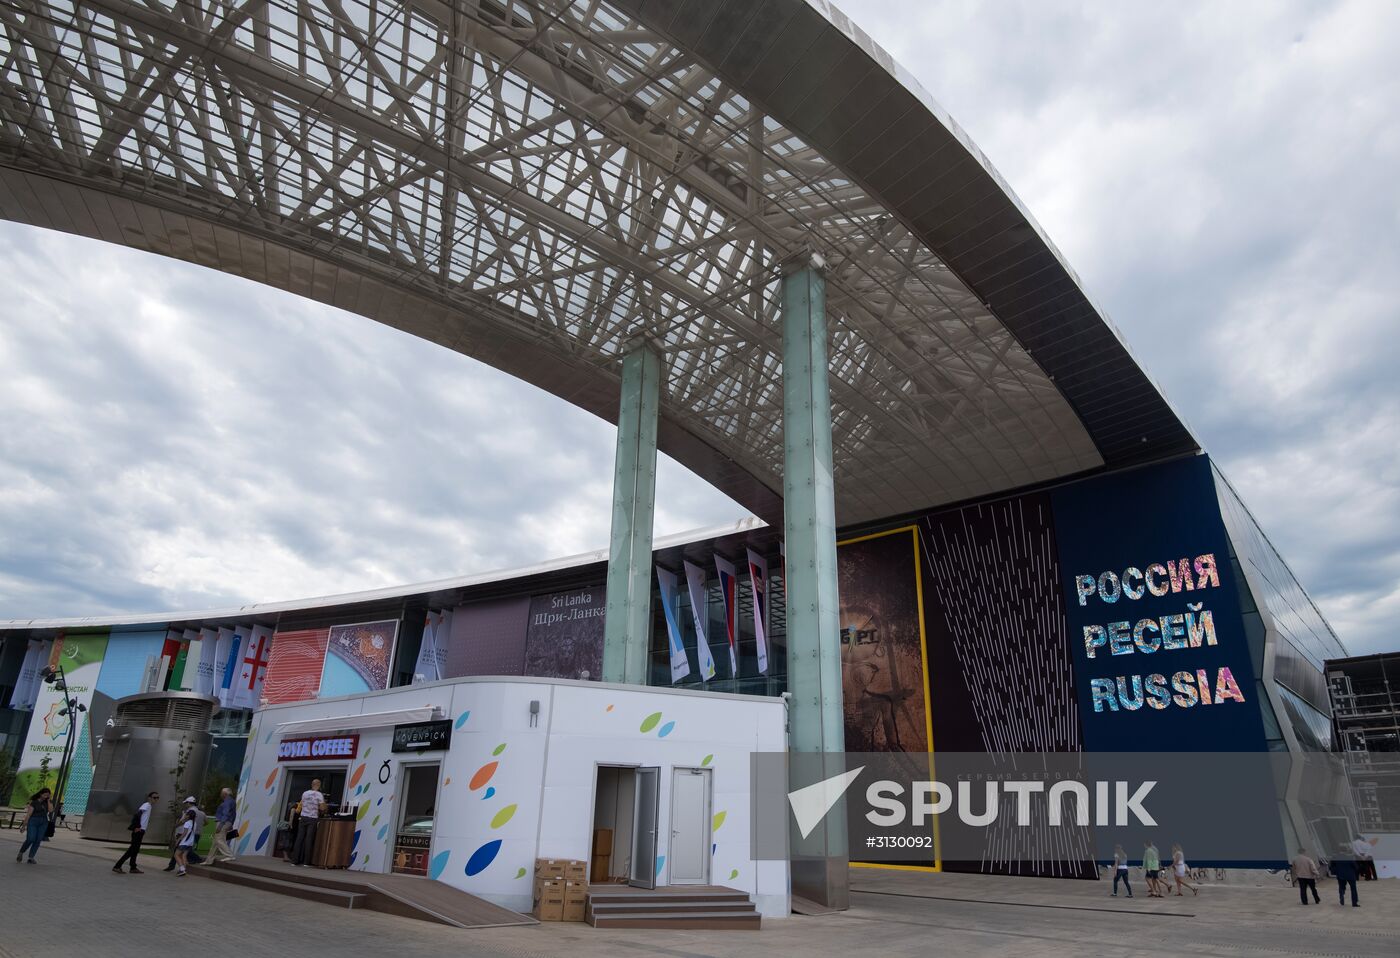 Expo 2017 specialized international exhibition in Astana